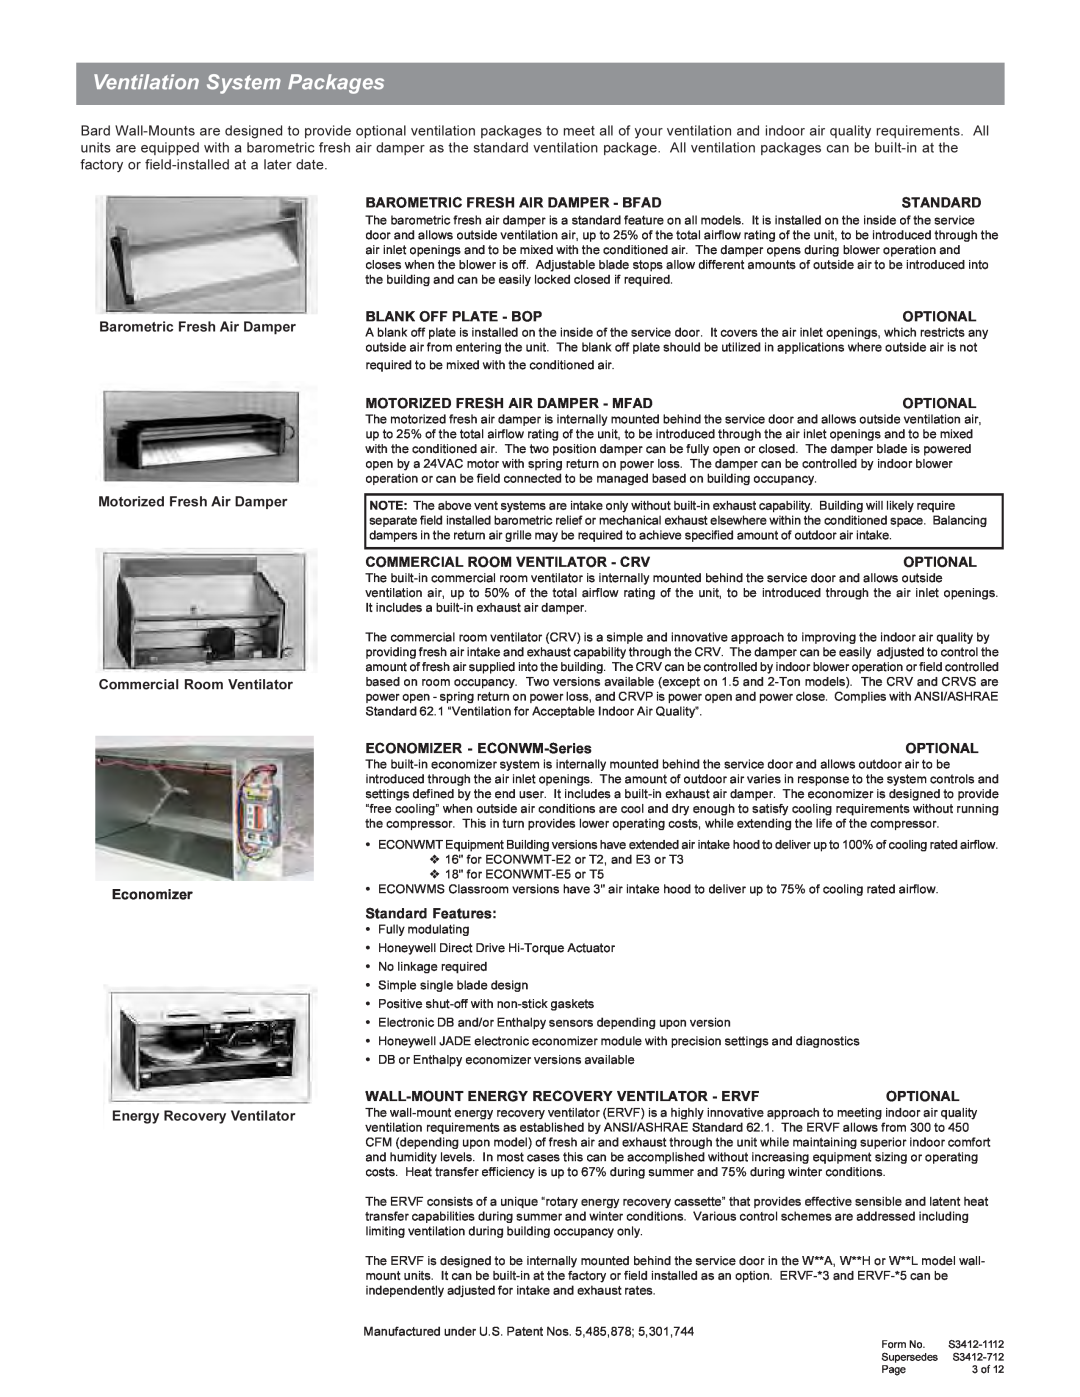 Bard W49A1, W61A1, W38A1 manual Ventilation System Packages 